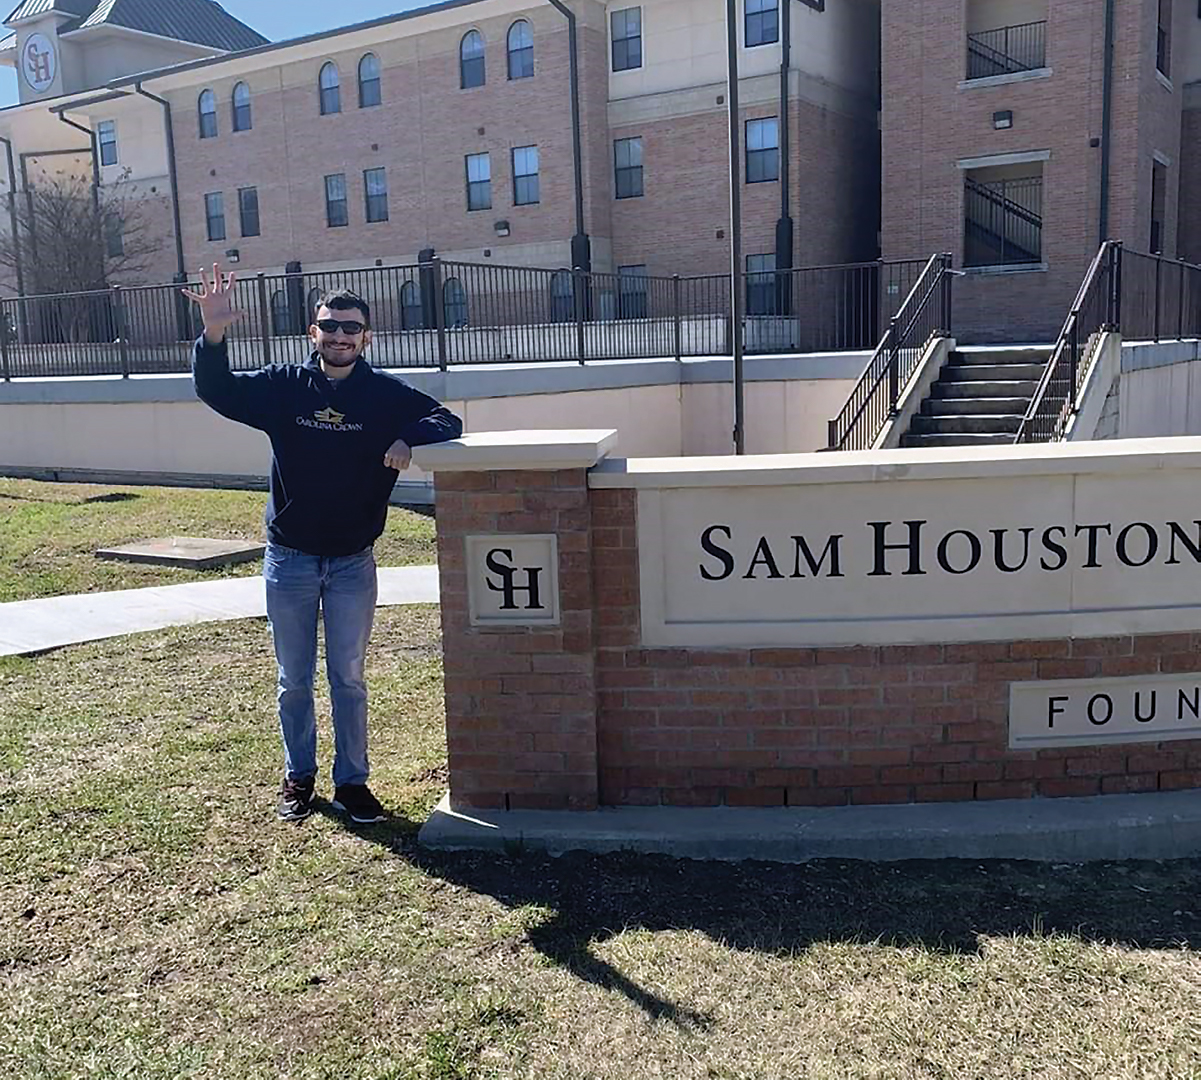 Mark Woods Posing with the Sam Houston sign at the corner of campus.